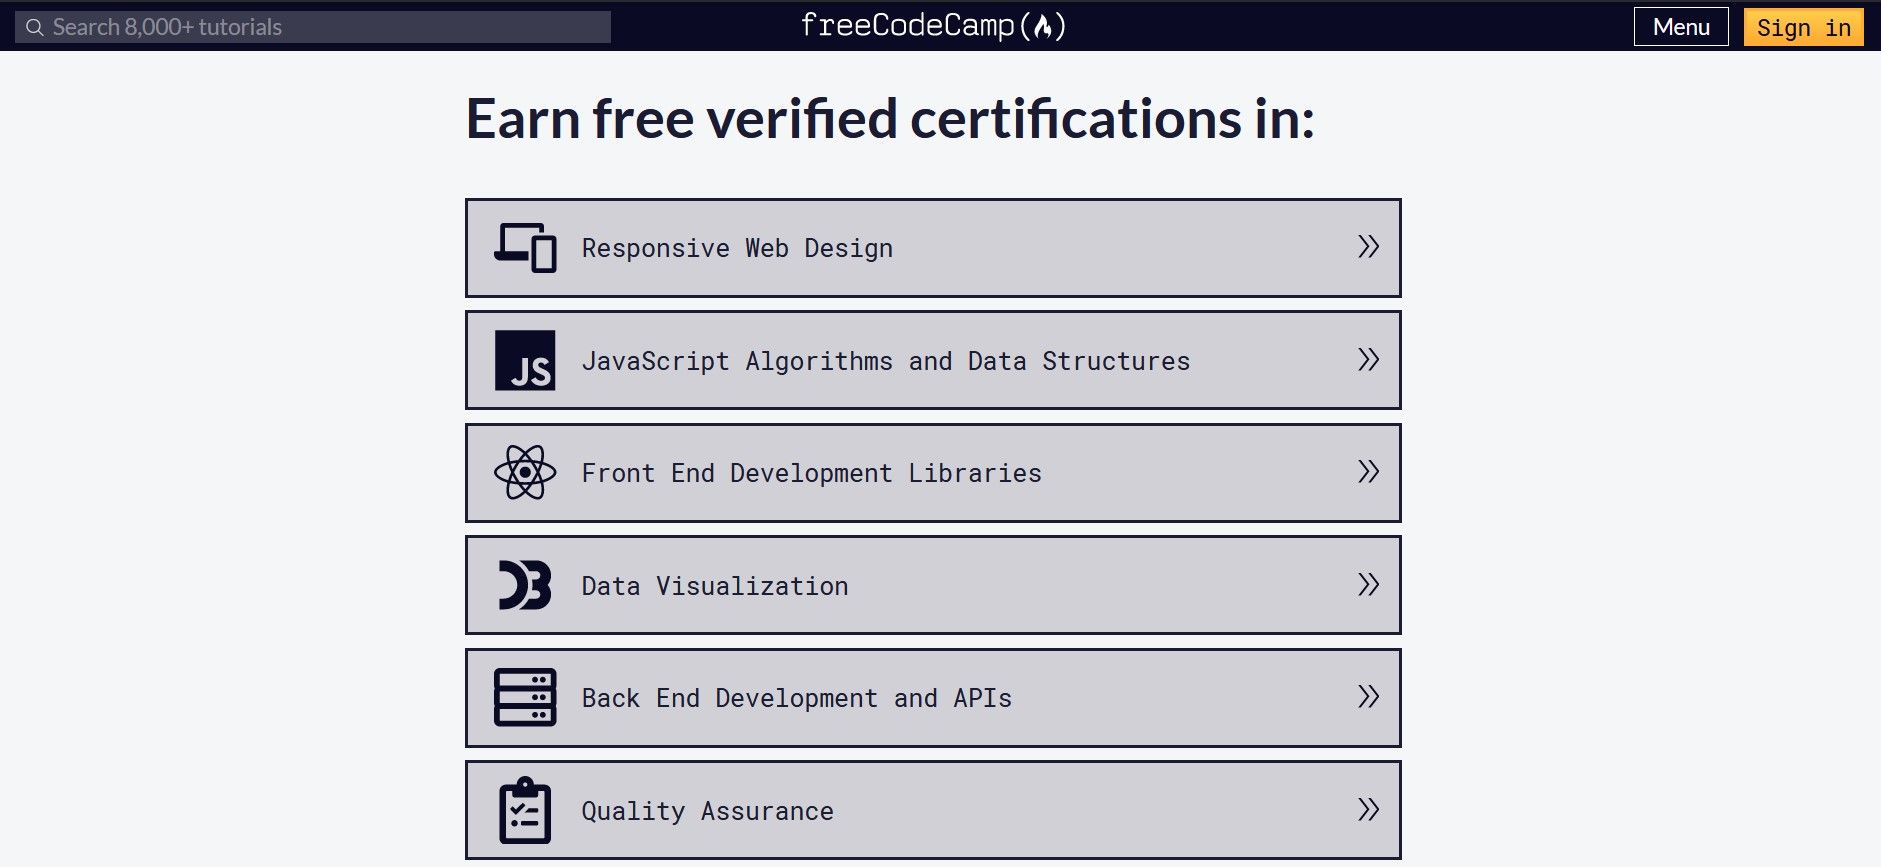 FreeCodeCamp Training Courses